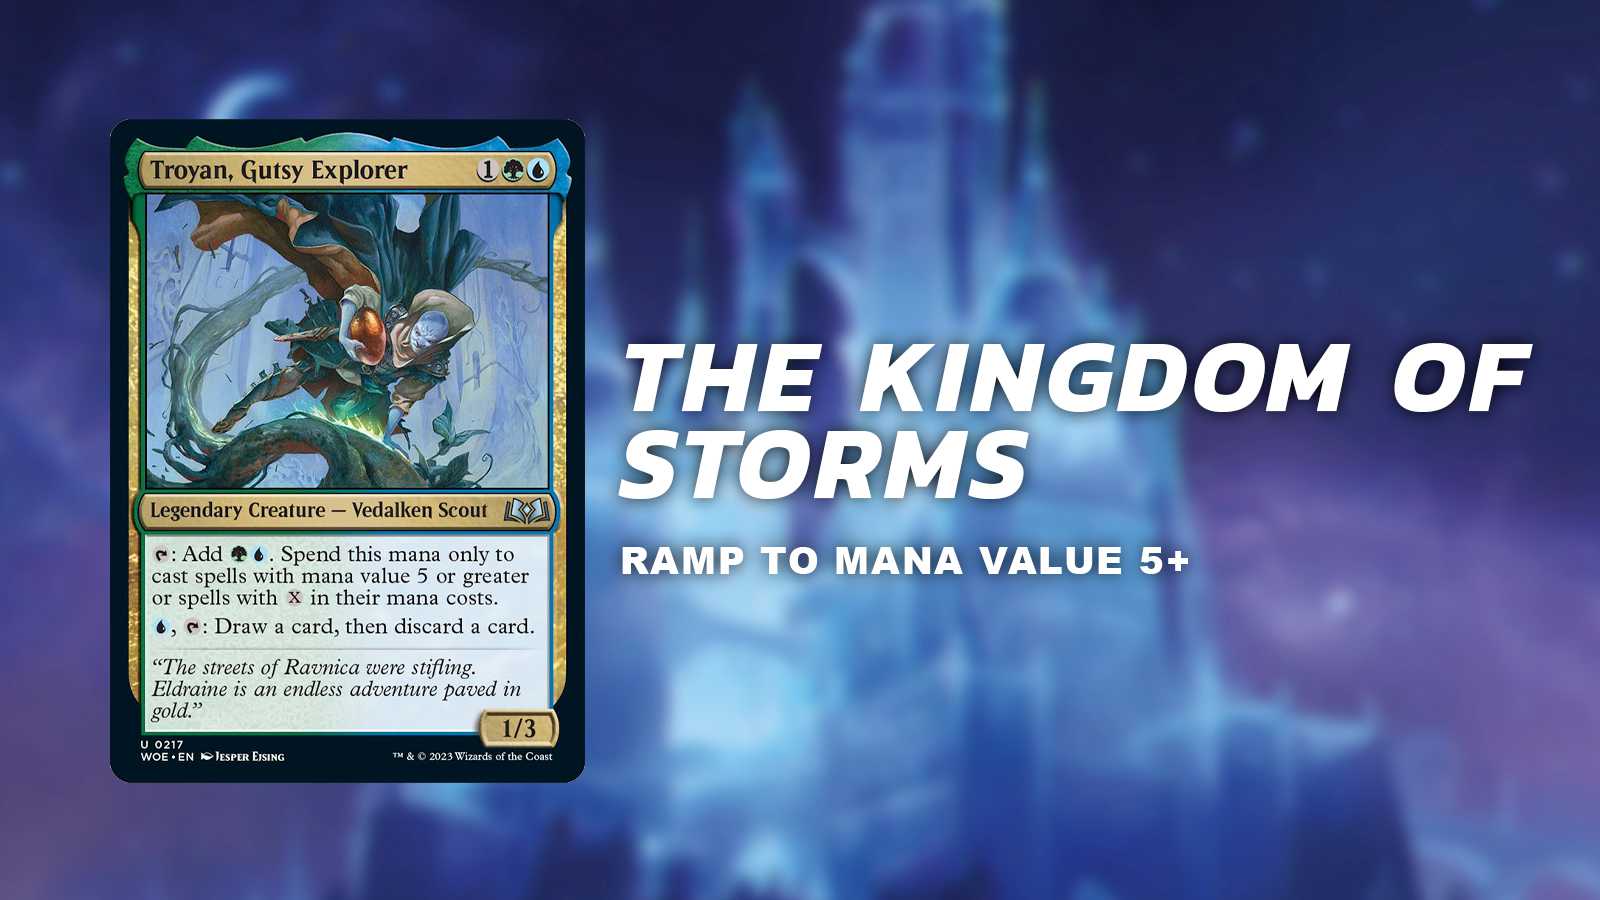 the kingdom of storms (ramp to mana value 5+)